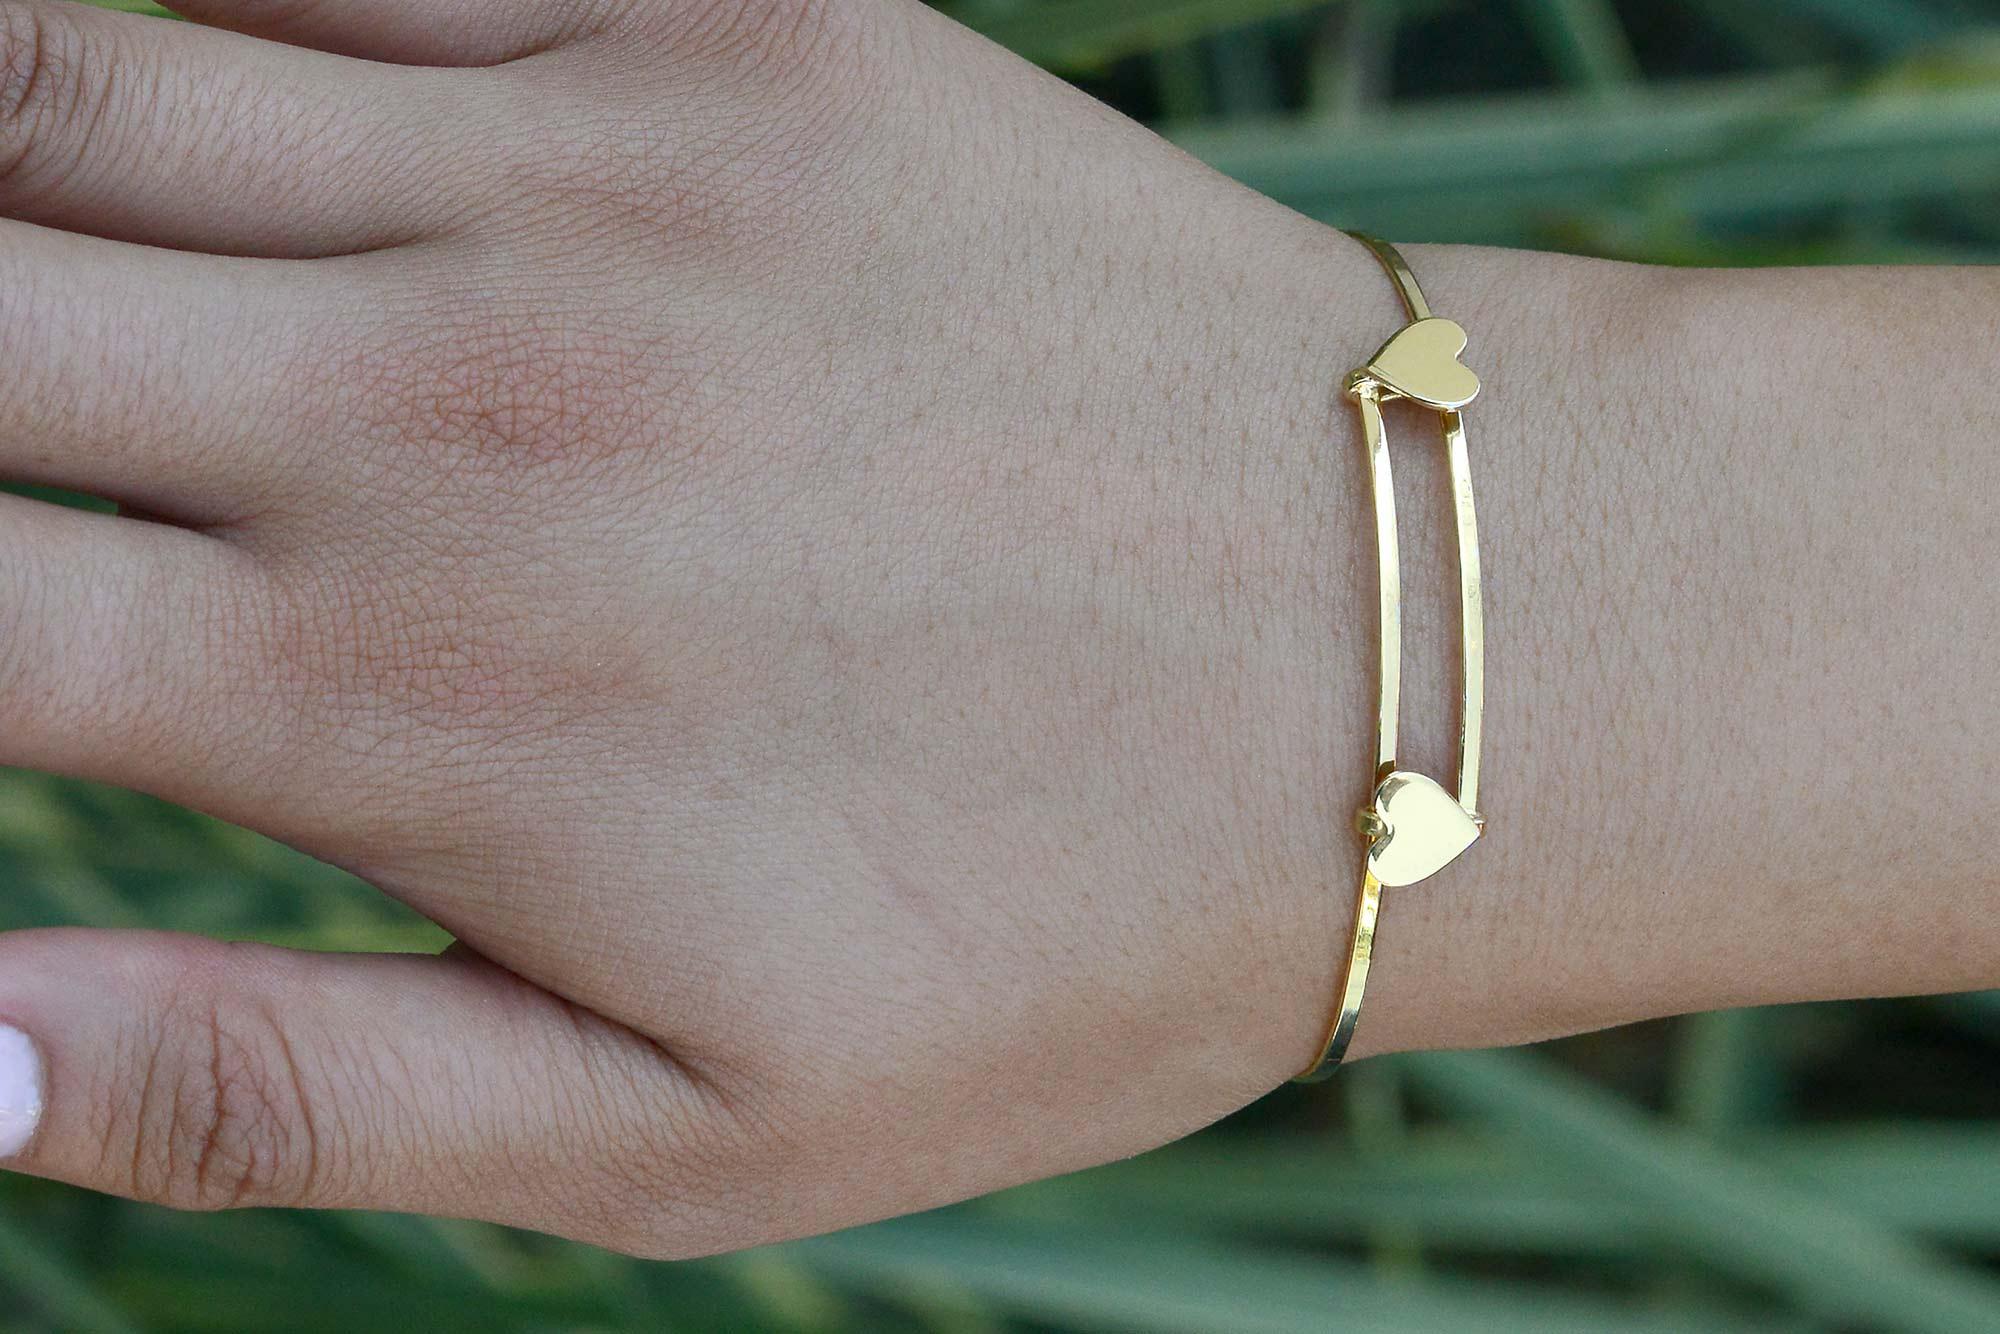 This lovely twin heart bracelet makes for a perfect stacking bangle. This vintage 1980s 14k yellow gold heirloom would be the perfect gift to a special person in your life or show some love to yourself! You can't go wrong with an effortless,